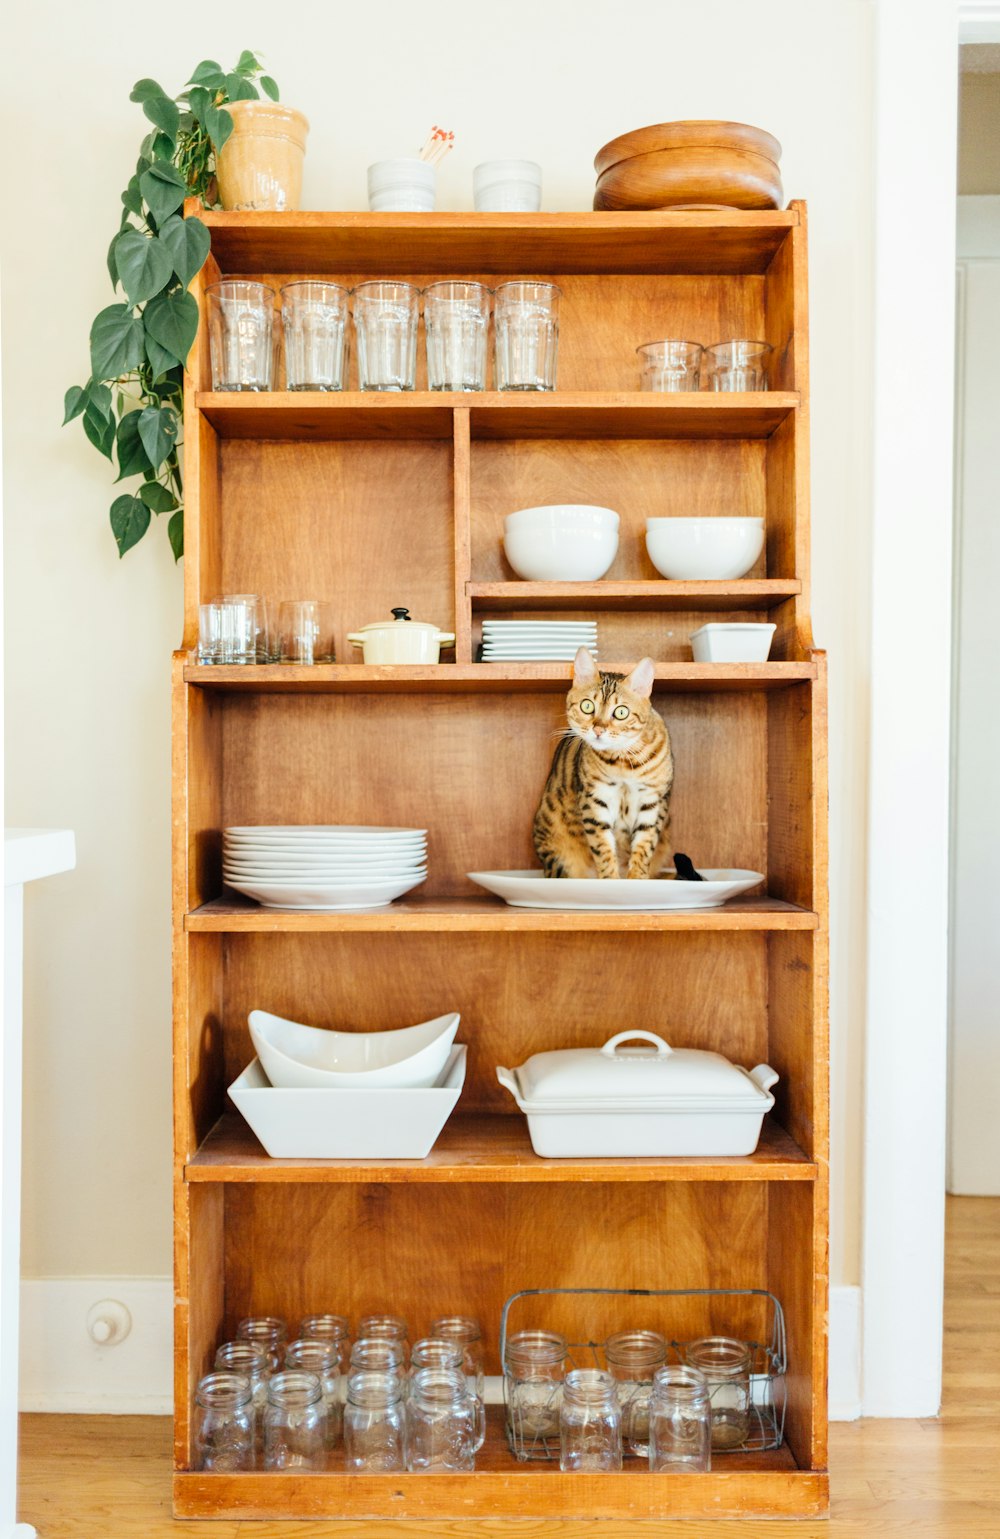 gray tabby cat on brown wooden shelves with cutleries inside house